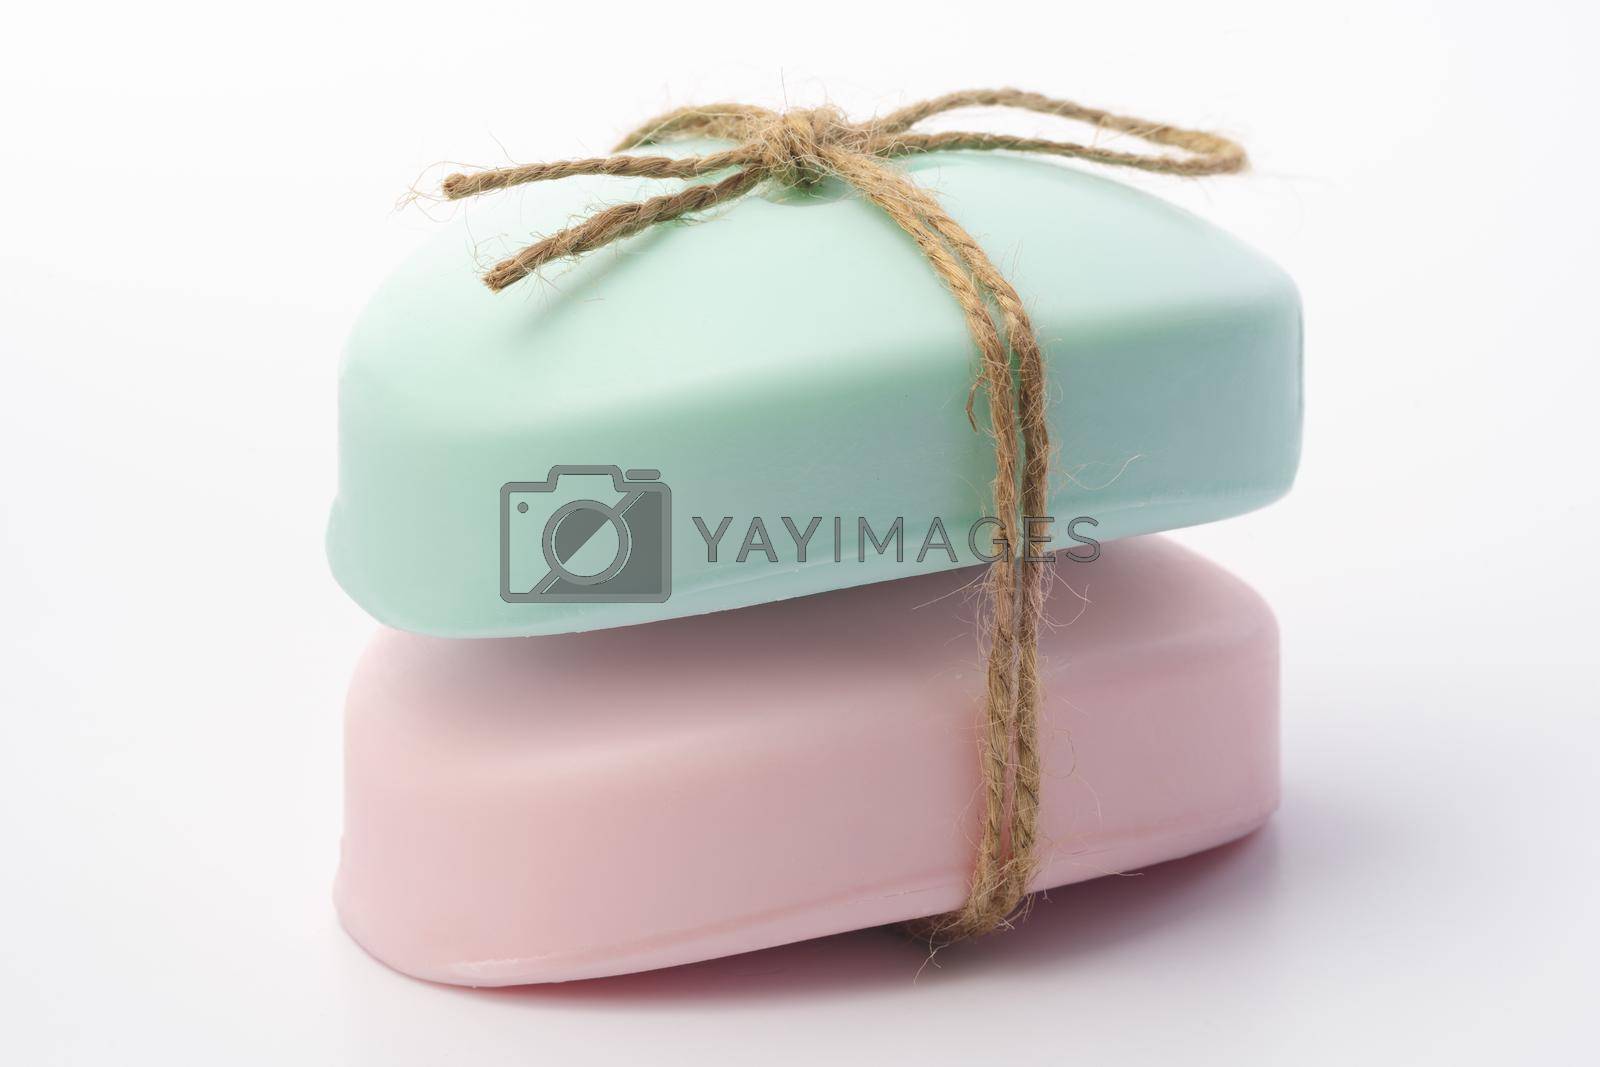 Royalty free image of Two pieces of soap tied with a ribbon on a white background by Fabrikasimf